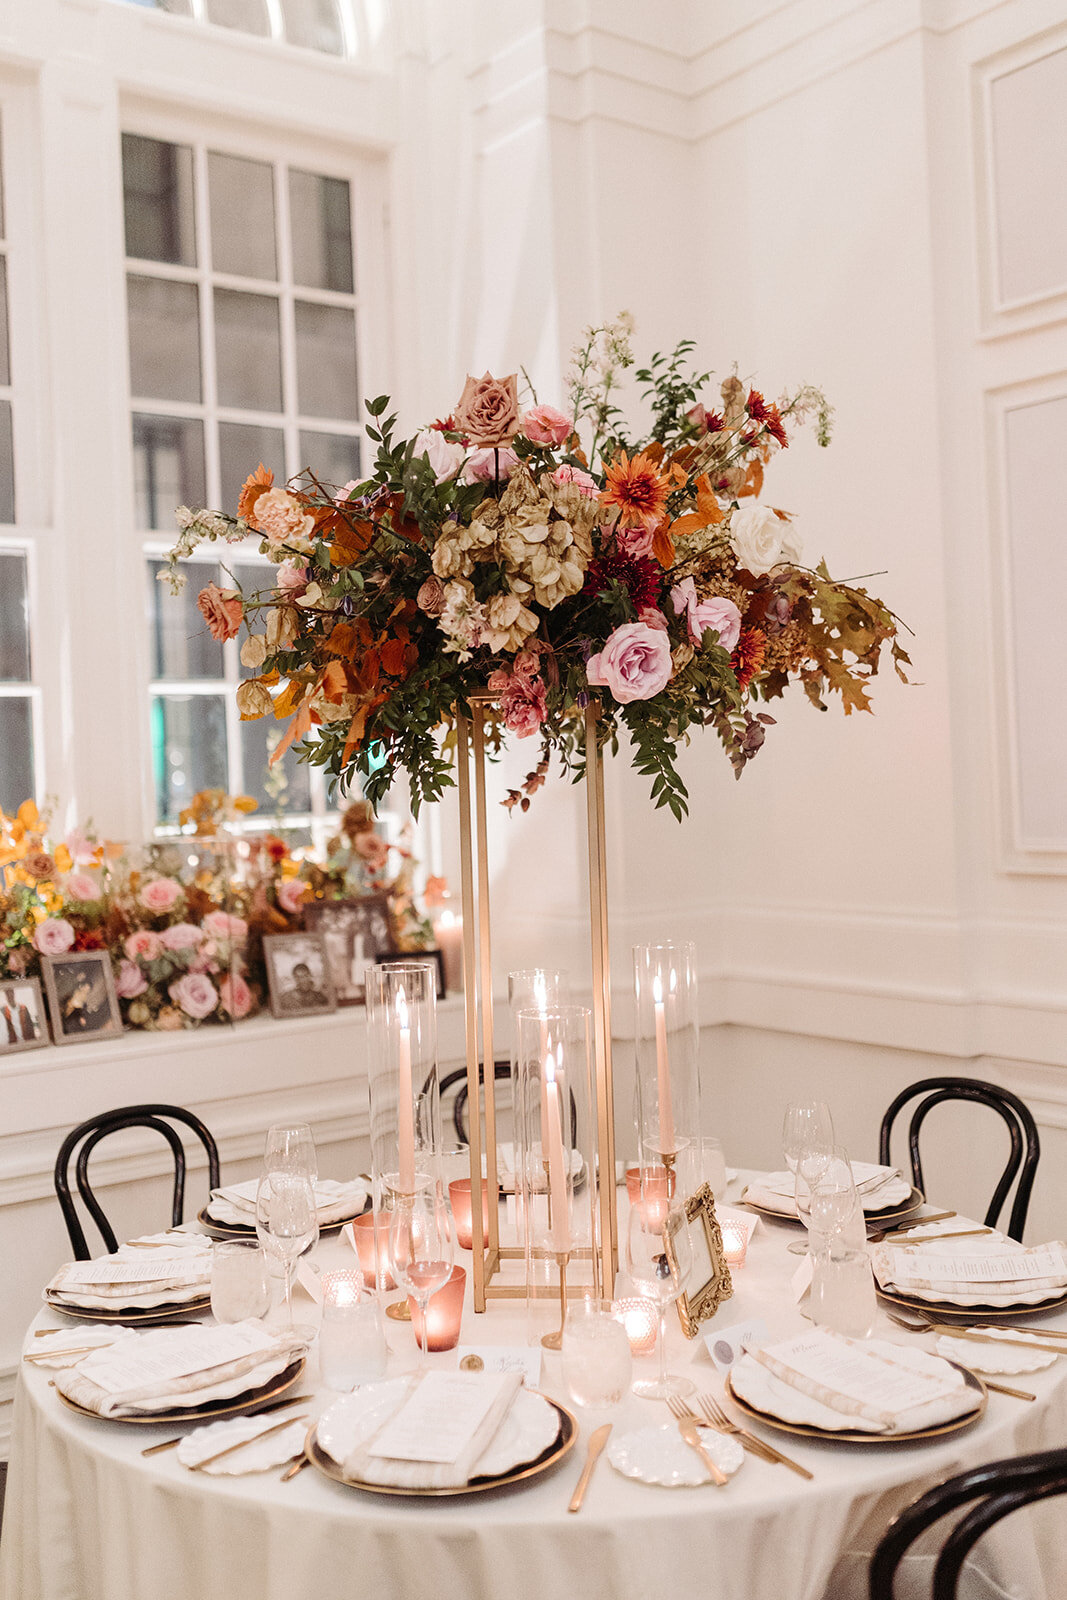 Lush floral meadows surround the cake at this Parisian inspired fall wedding with hues of dusty rose, terra cotta, mauve, copper, and lavender composed of roses, ranunculus, copper beech, clematis, and fall foliage. Design by Rosemary and Finch in Nashville, TN.